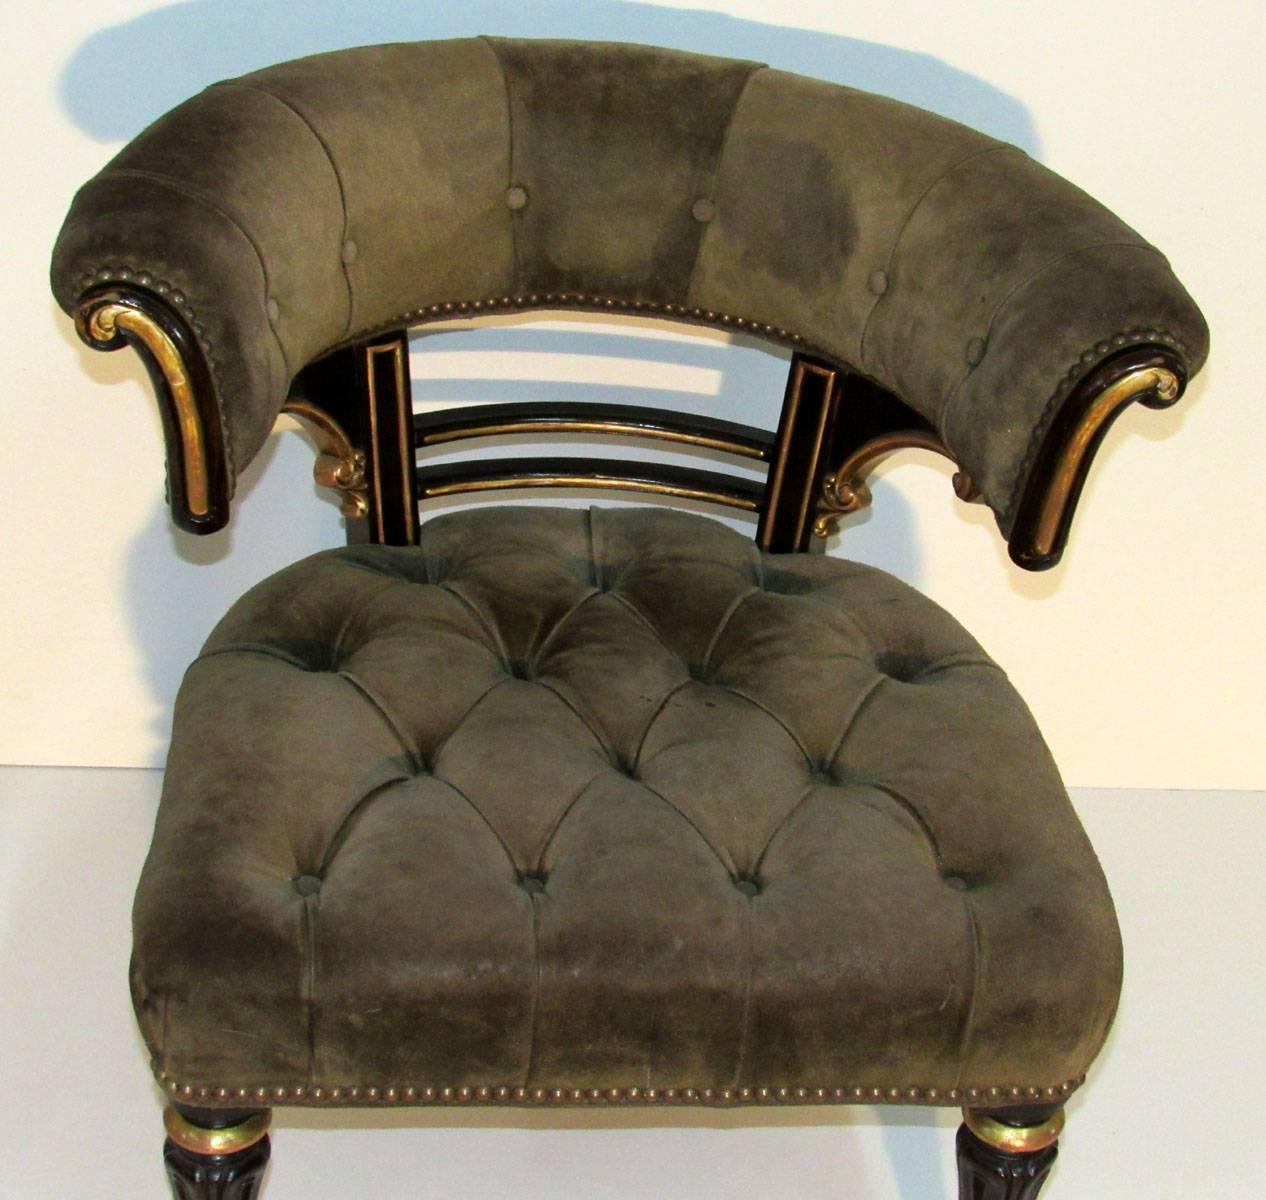 William IV curved back armchair, with wooden and gilt detail, upholstered in tufted leather and resting upon brass casters, from a project by Peter Marino.